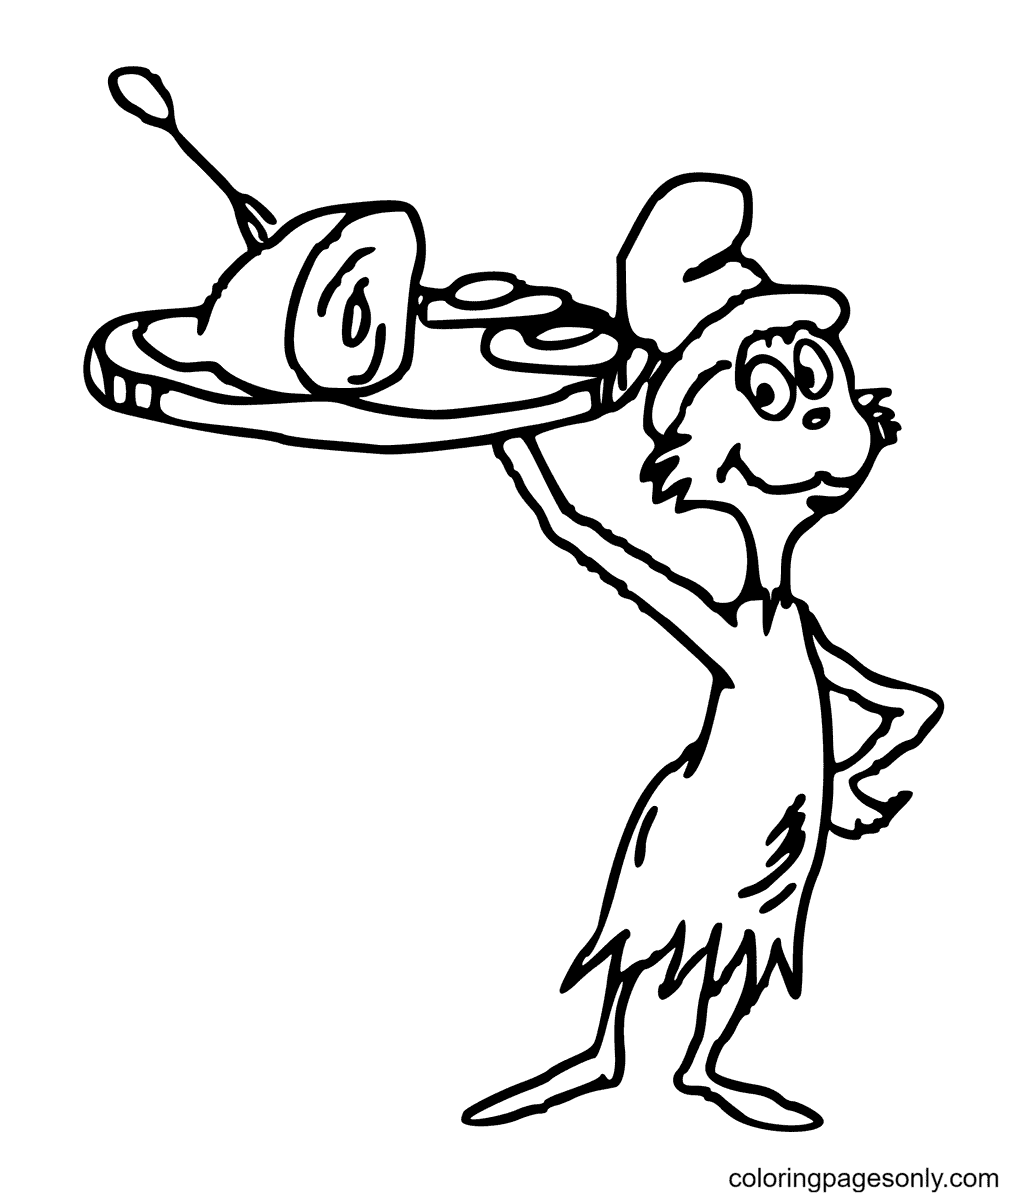 Green Eggs and Ham Coloring Page